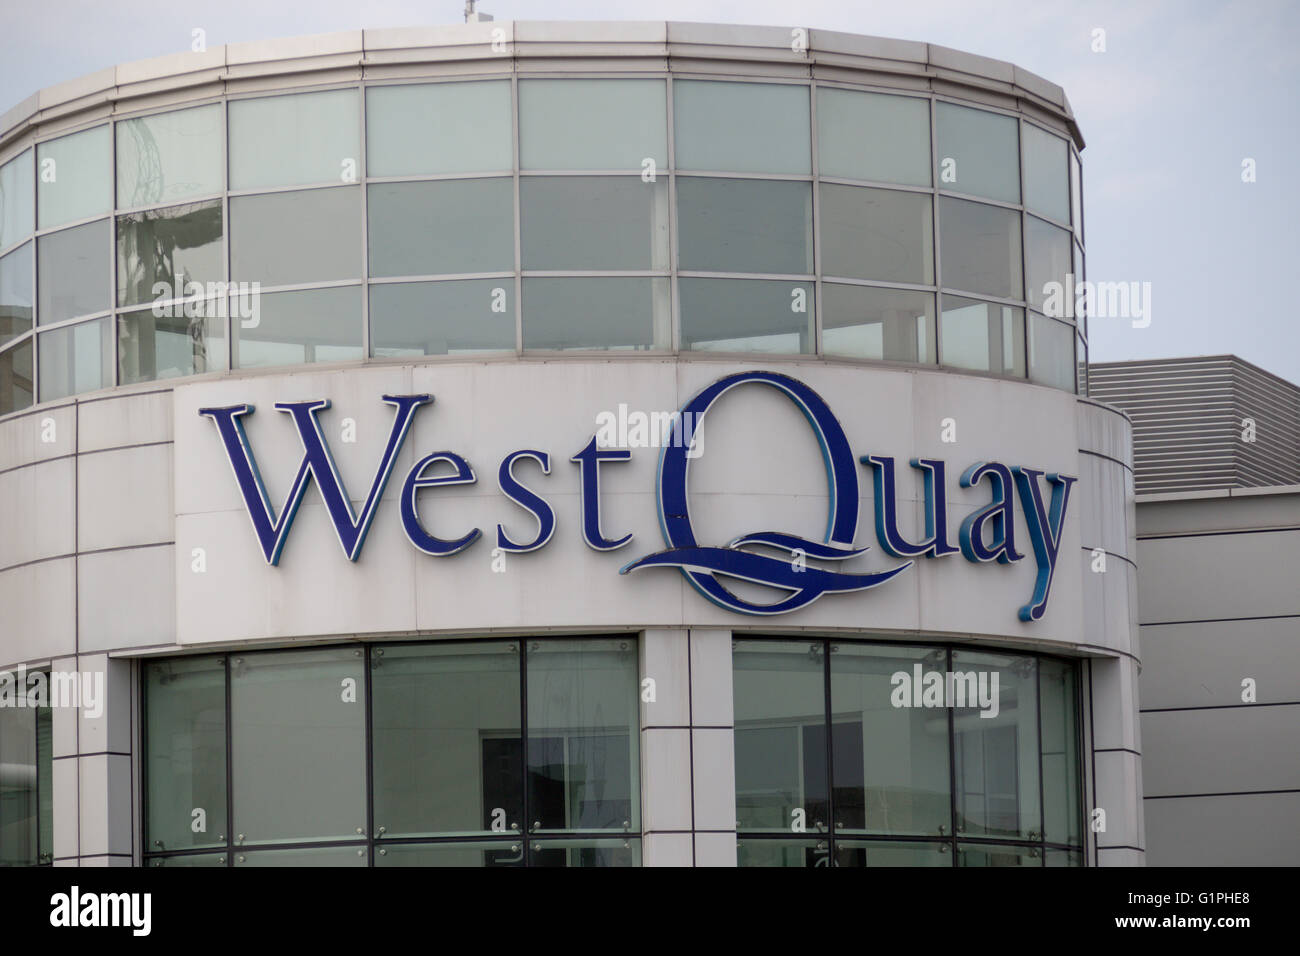 Southampton, UK - 14th May 2016. The West Quay Shopping Centre, located in the city centre of Southampton. Stock Photo